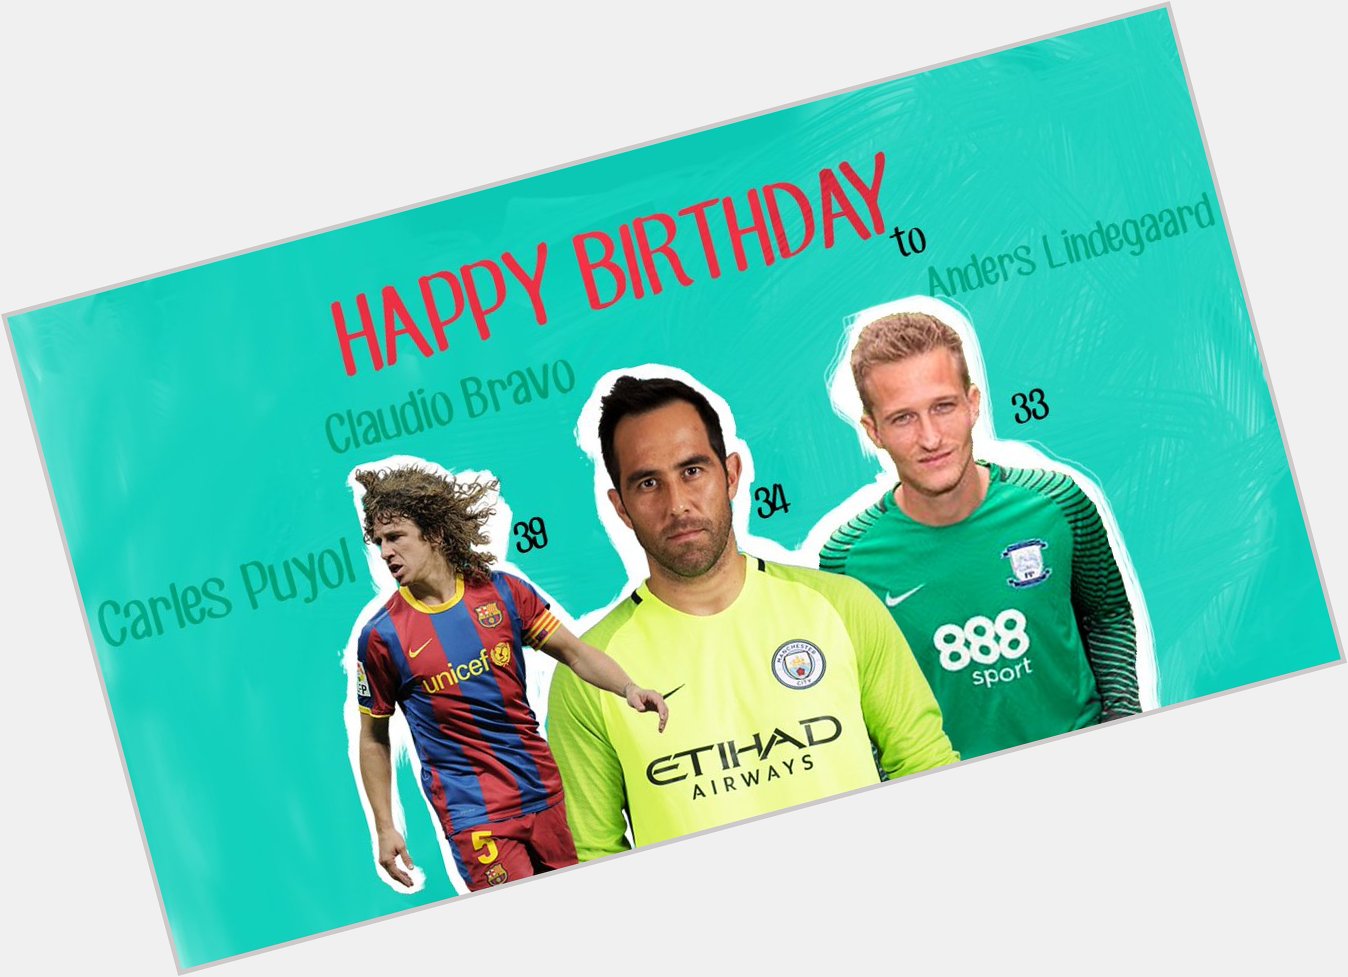 Happy Birthday to Carles Puyol (39), Claudio Bravo (34) and Andres Lindegaard (33)!! 